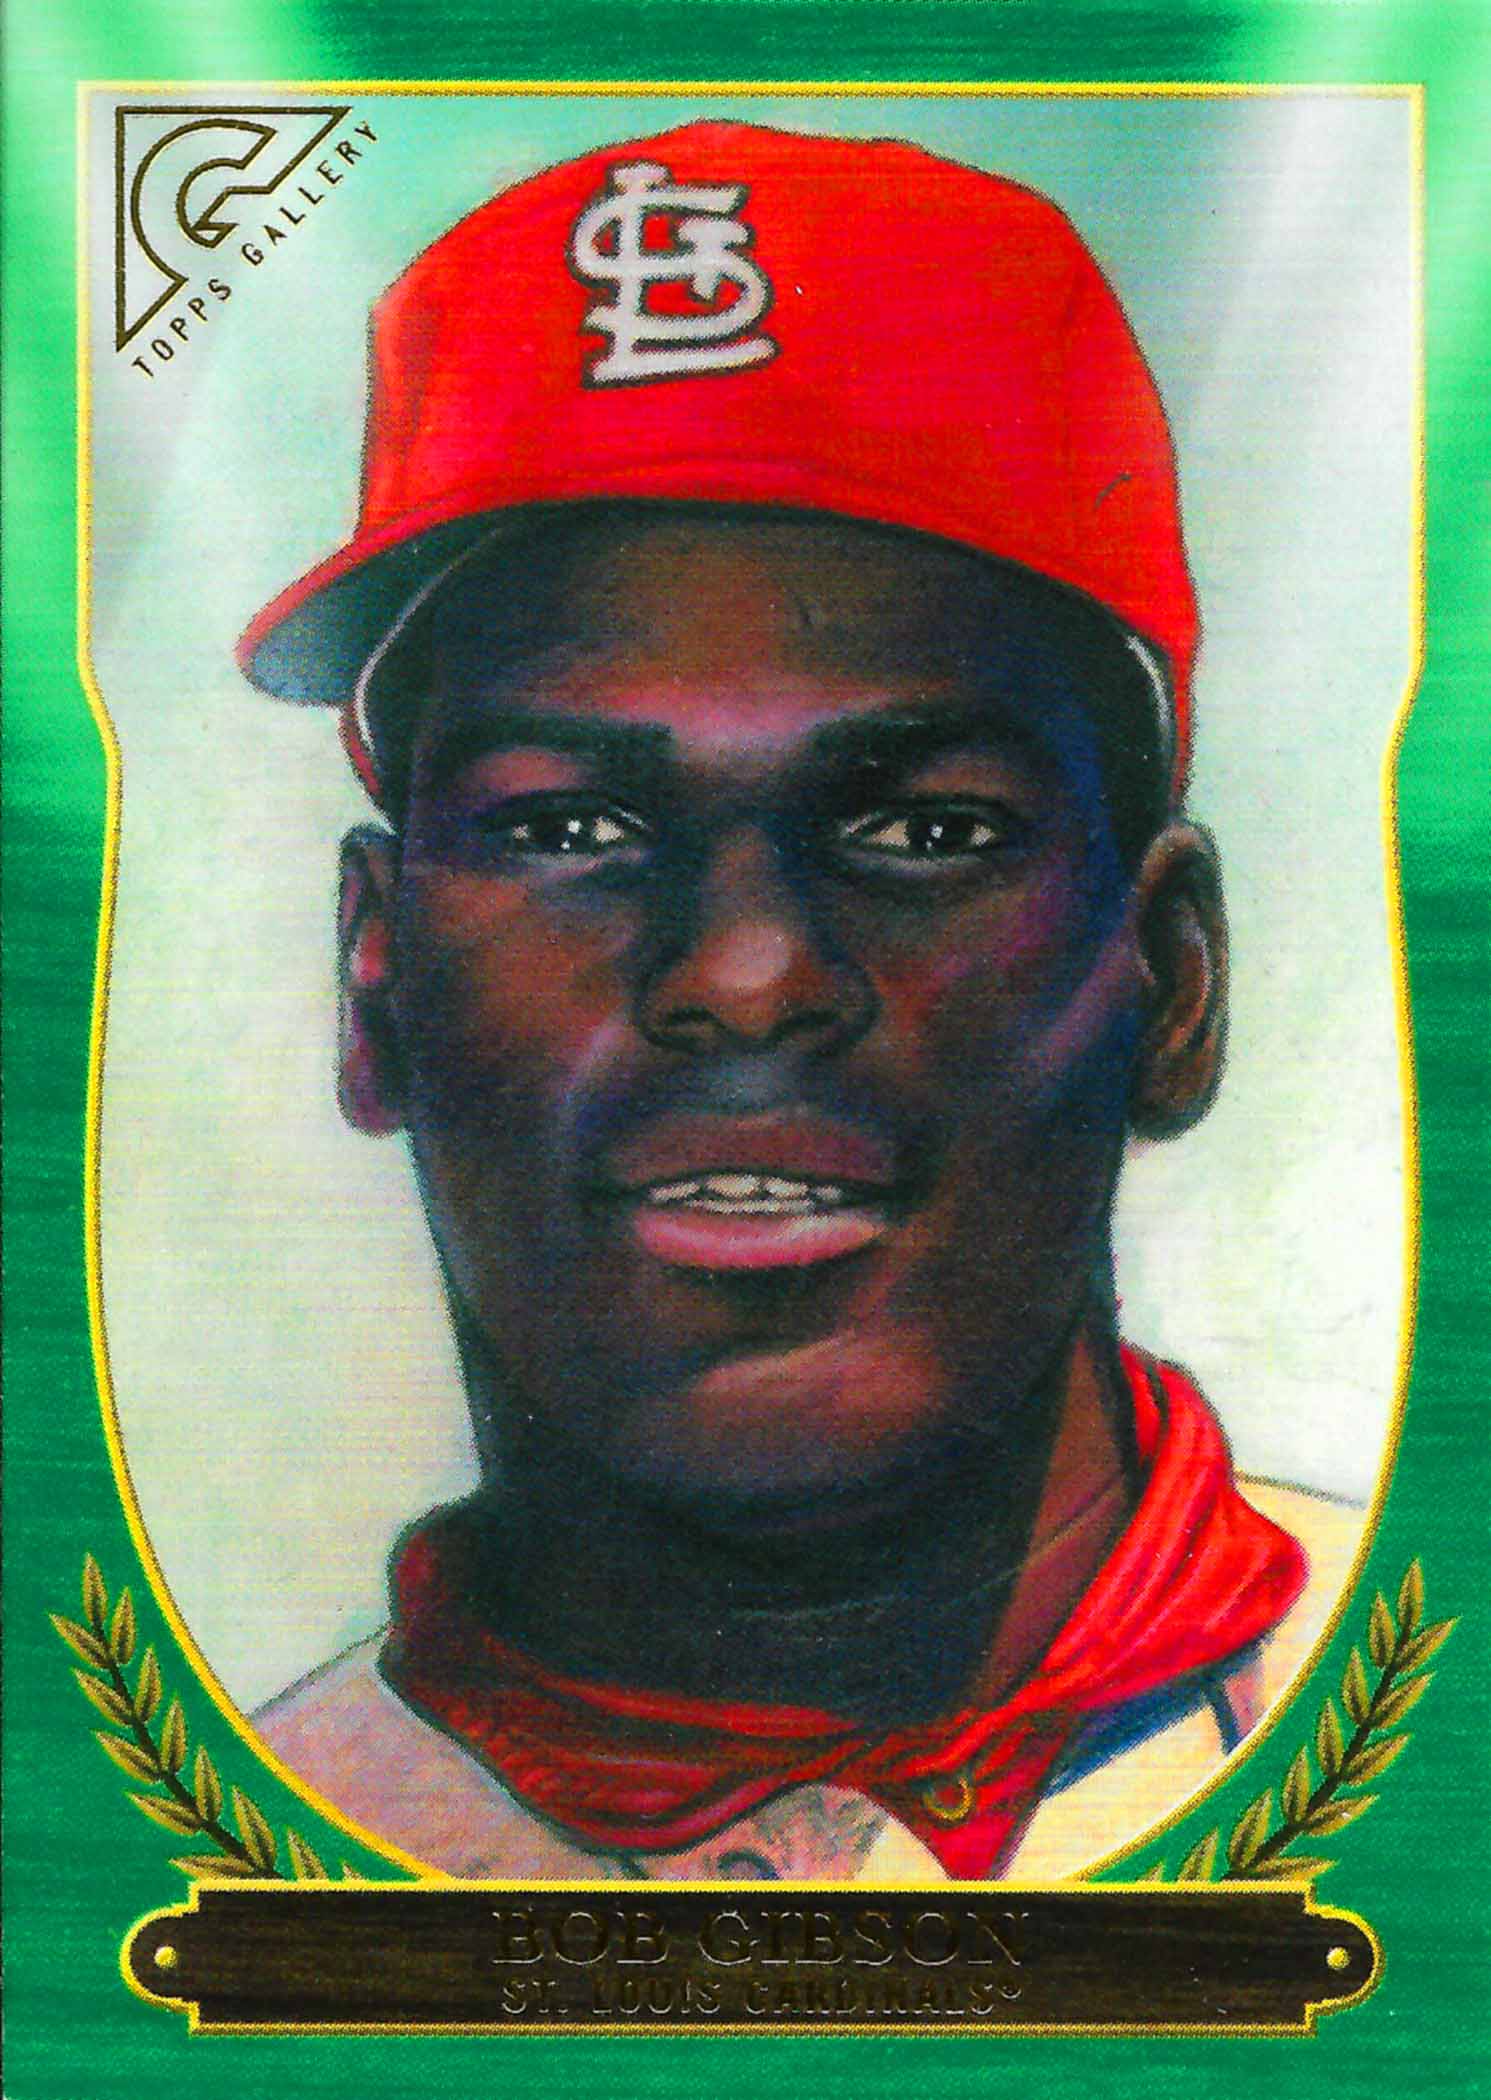 2018 Topps Gallery Hall of Fame Green